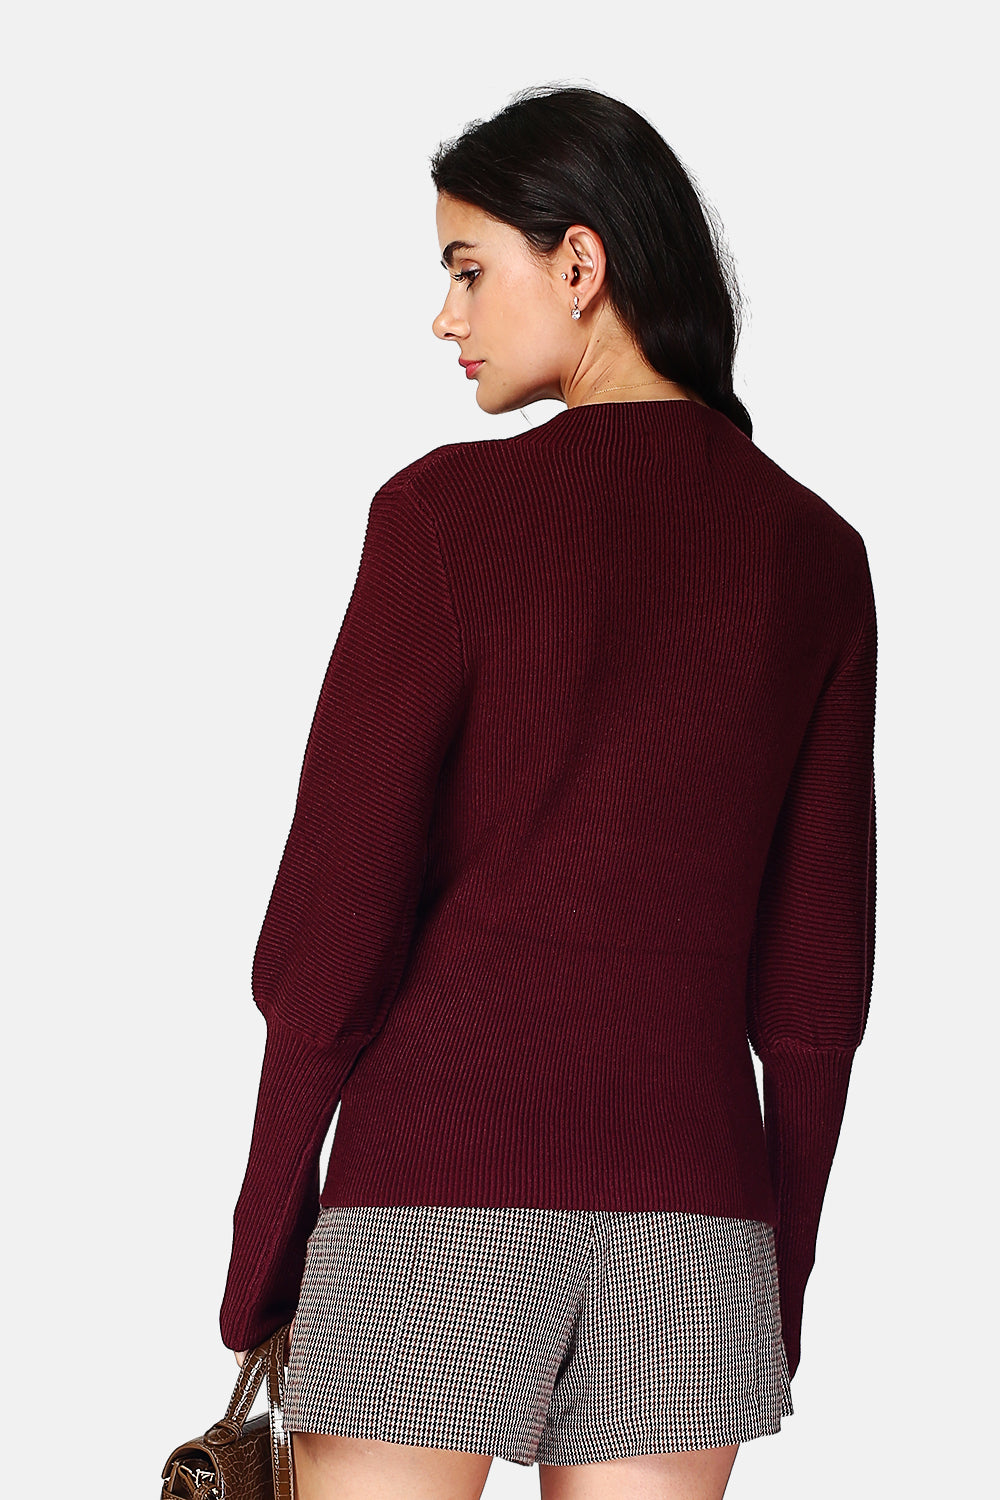 Long-sleeved turtleneck sweater with thumb opening